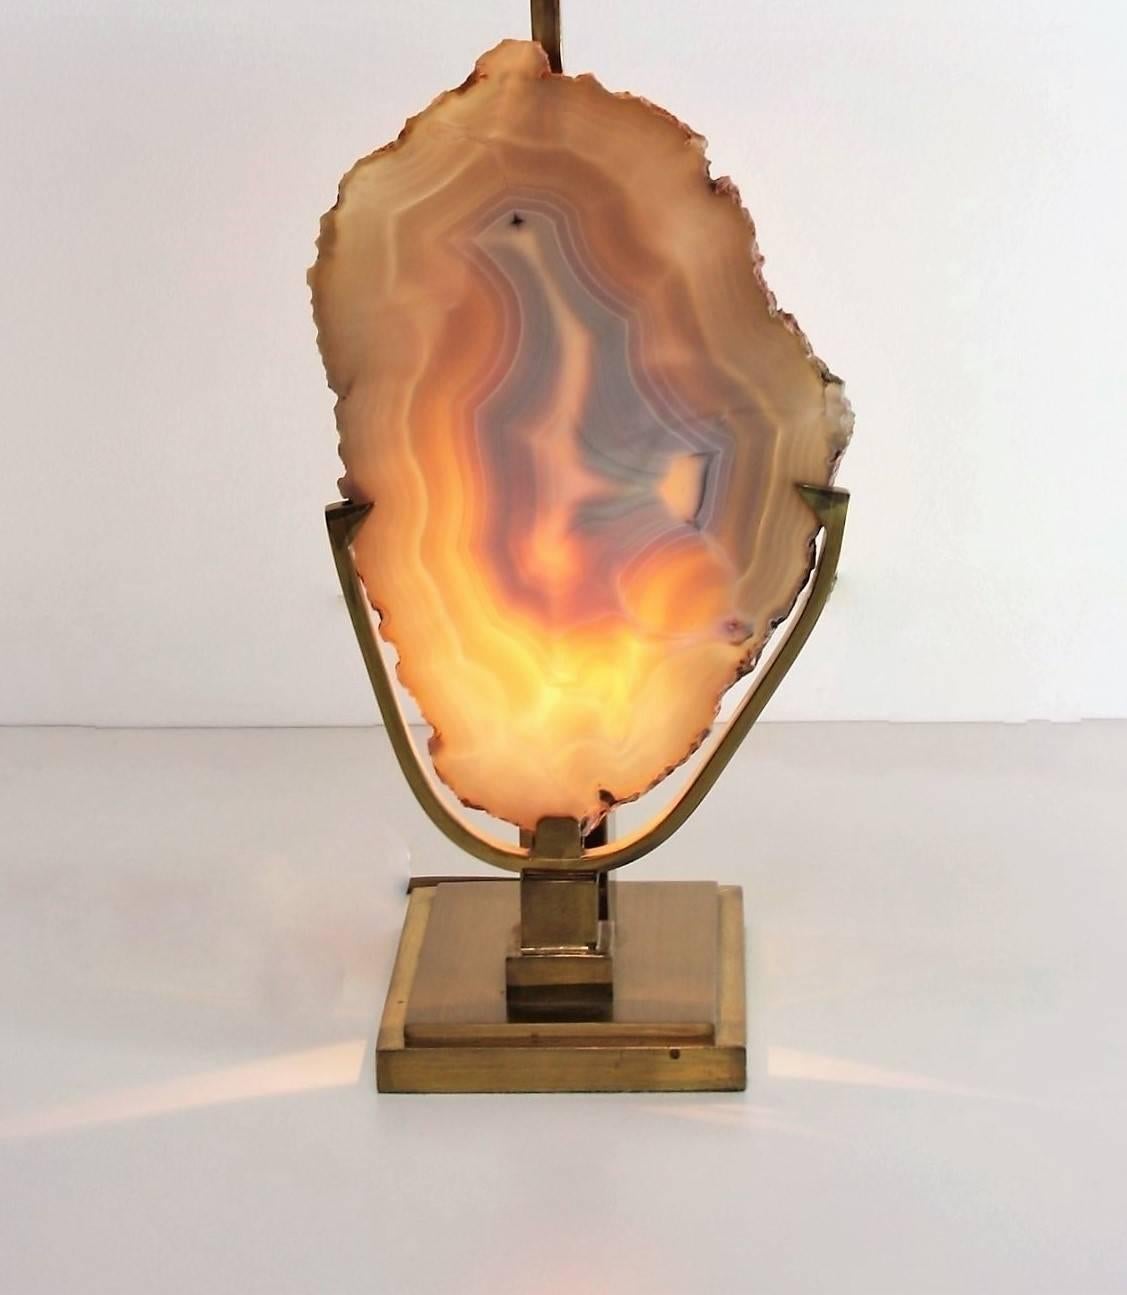 Belgian Large Agate Table Lamp from Willy Daro, circa 1970s.
The fabric shade was changed a few years ago, but still in good condition. Shade measures are 16.93 inches W x 10.23 inches D x 11.02 inches H.

 